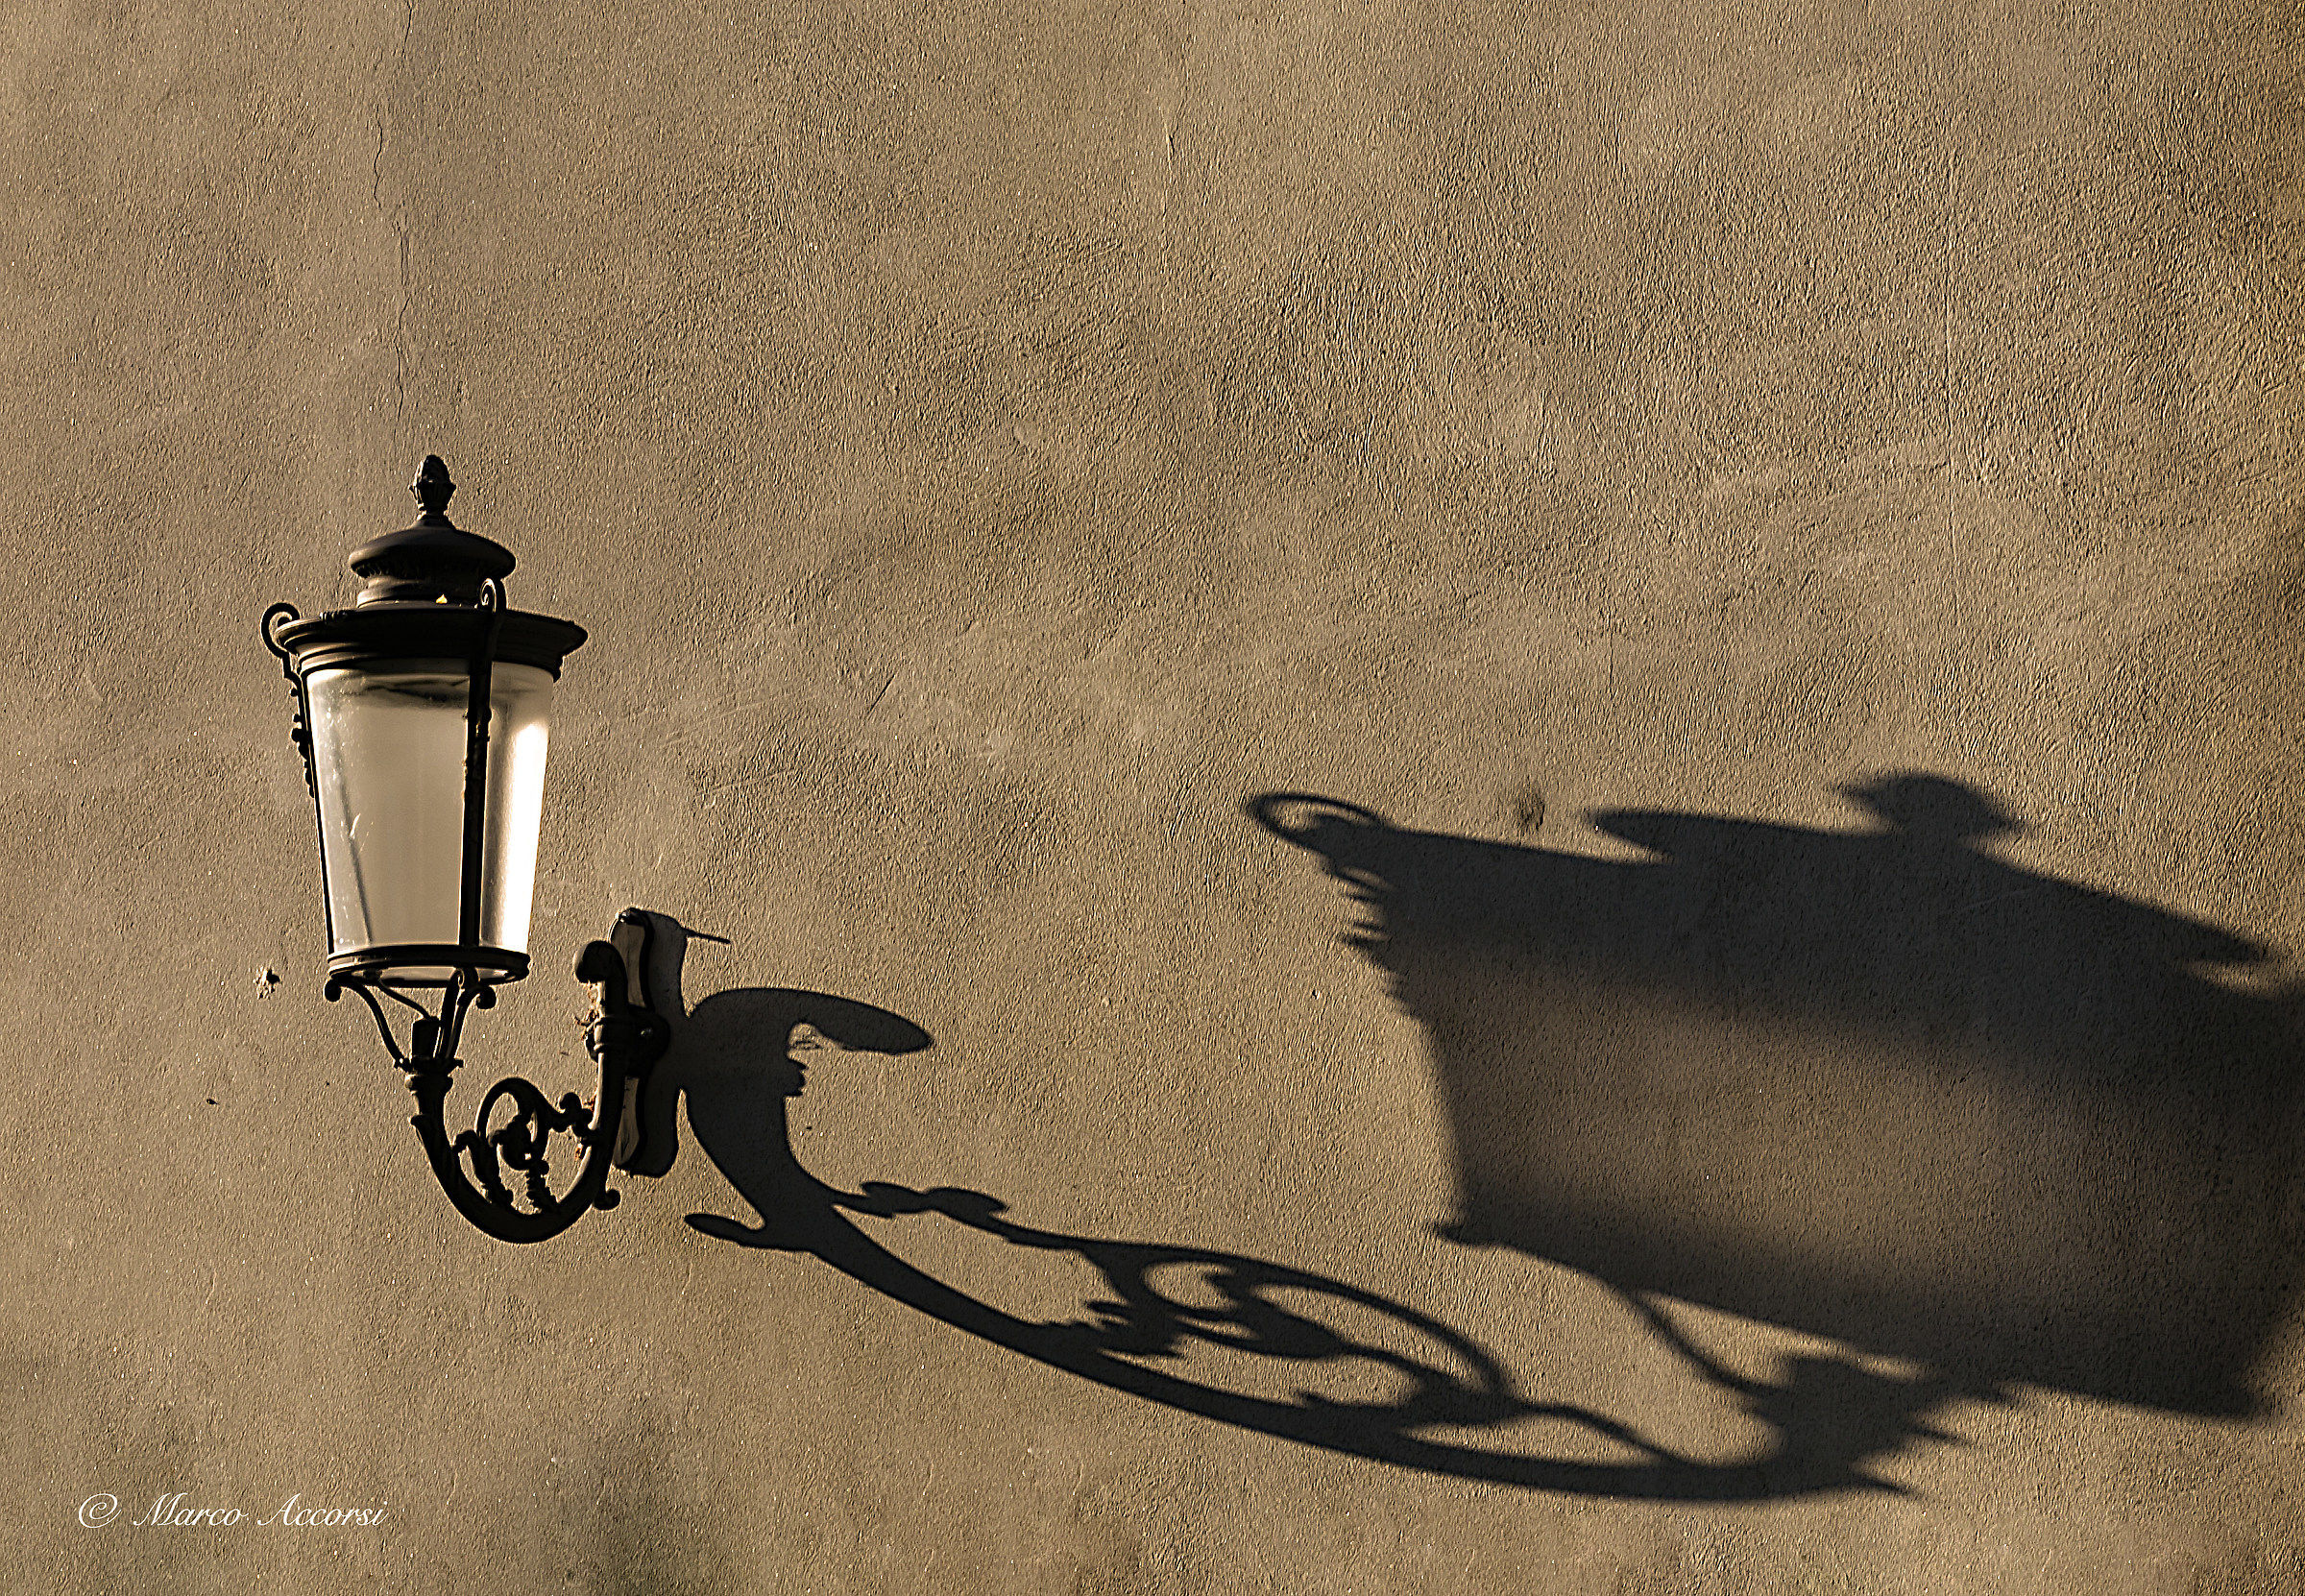 The lamp and its Shadow...